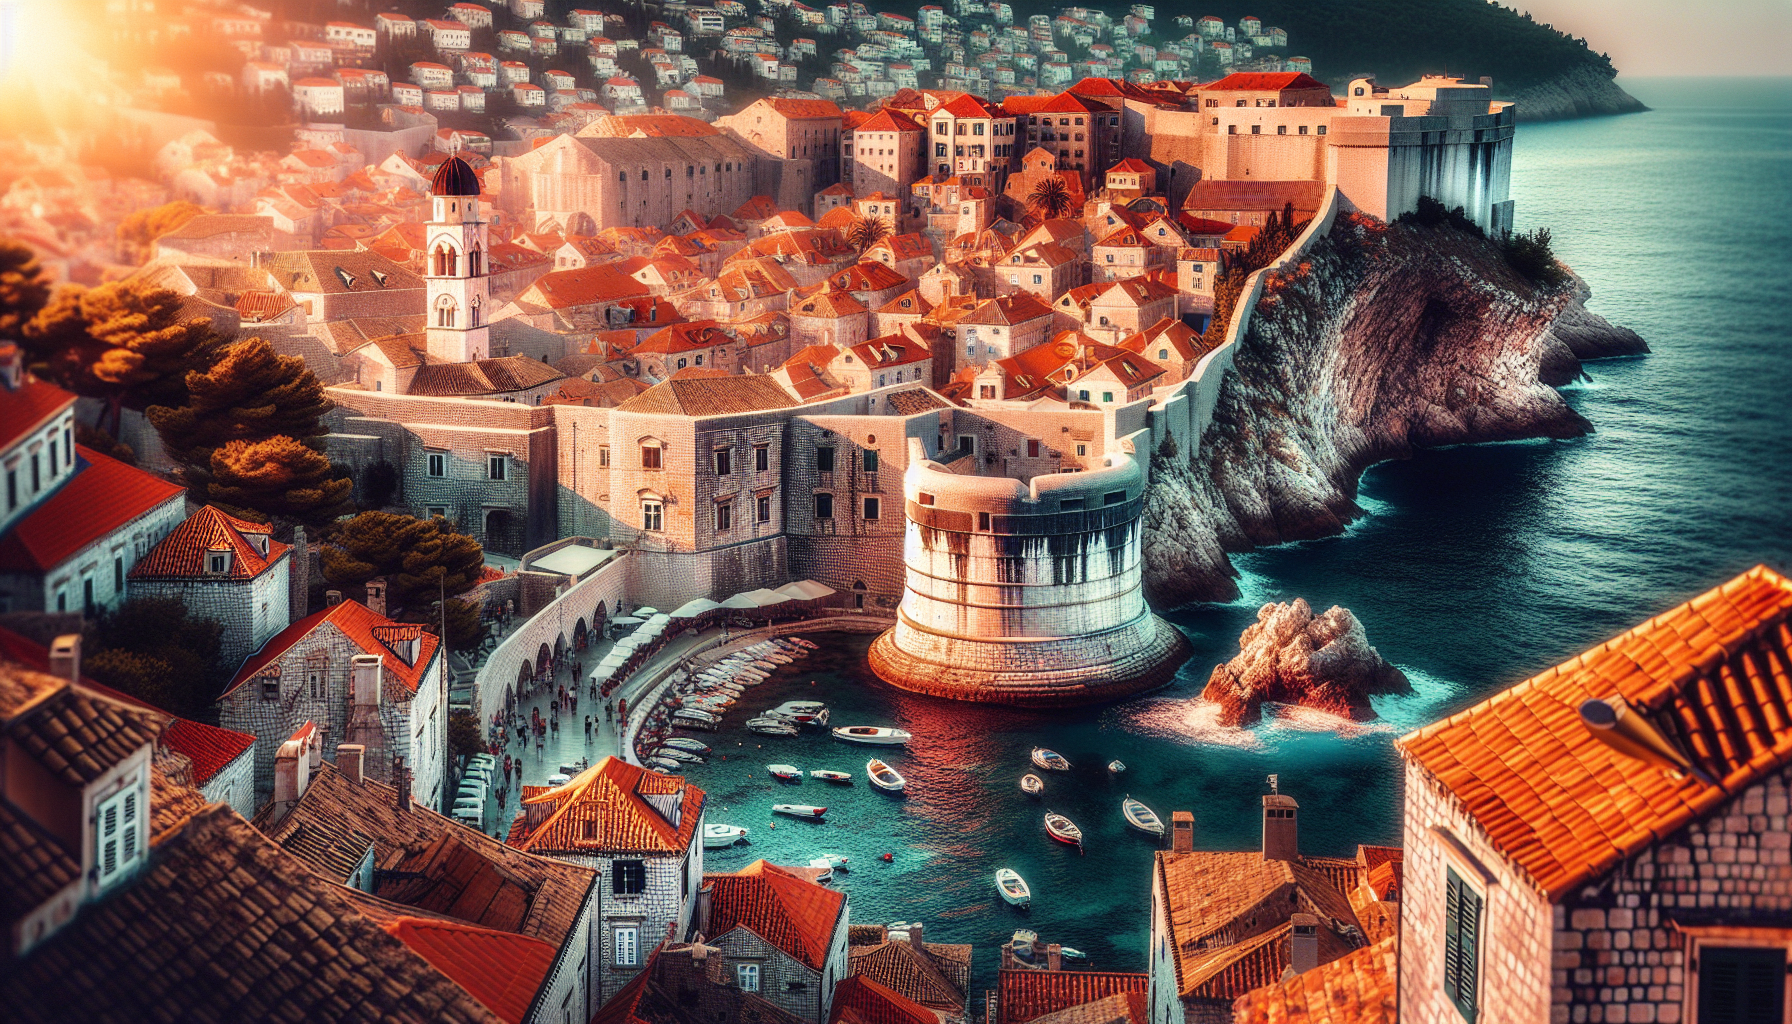 discover the best places to visit in europe, including the walled city of dubrovnik in croatia. uncover historic charm, stunning vistas, and cultural wonders.